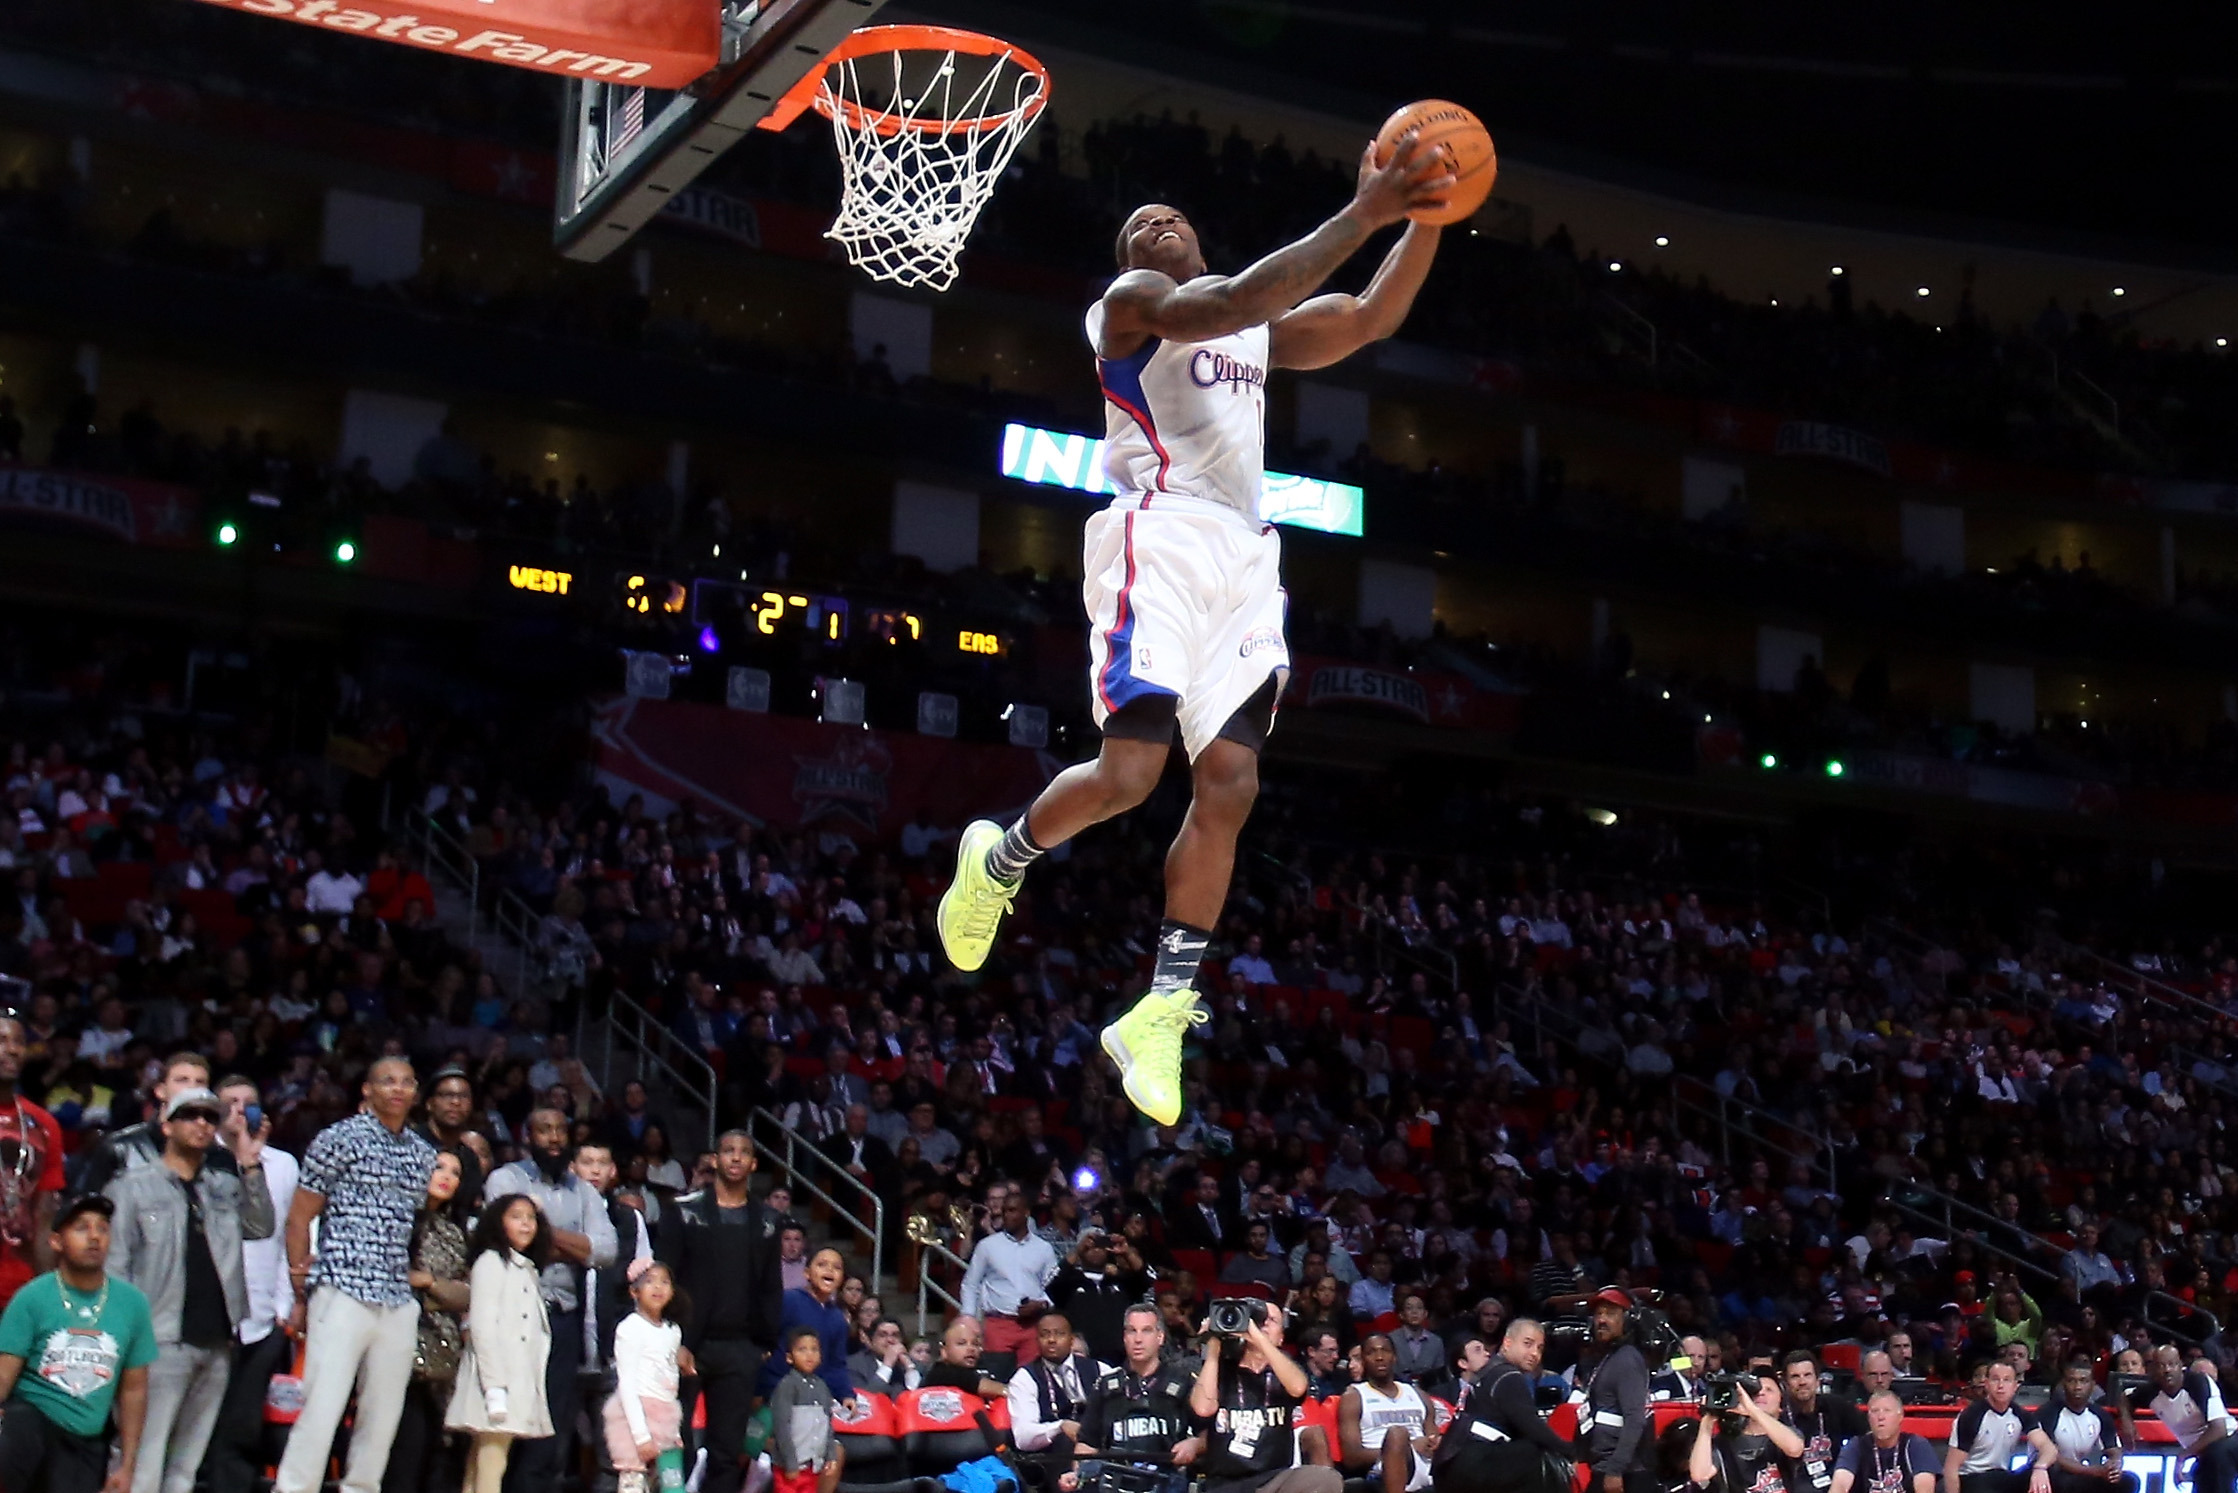 Who has made the highest vertical jump in NBA? How did he break the record?  - Quora